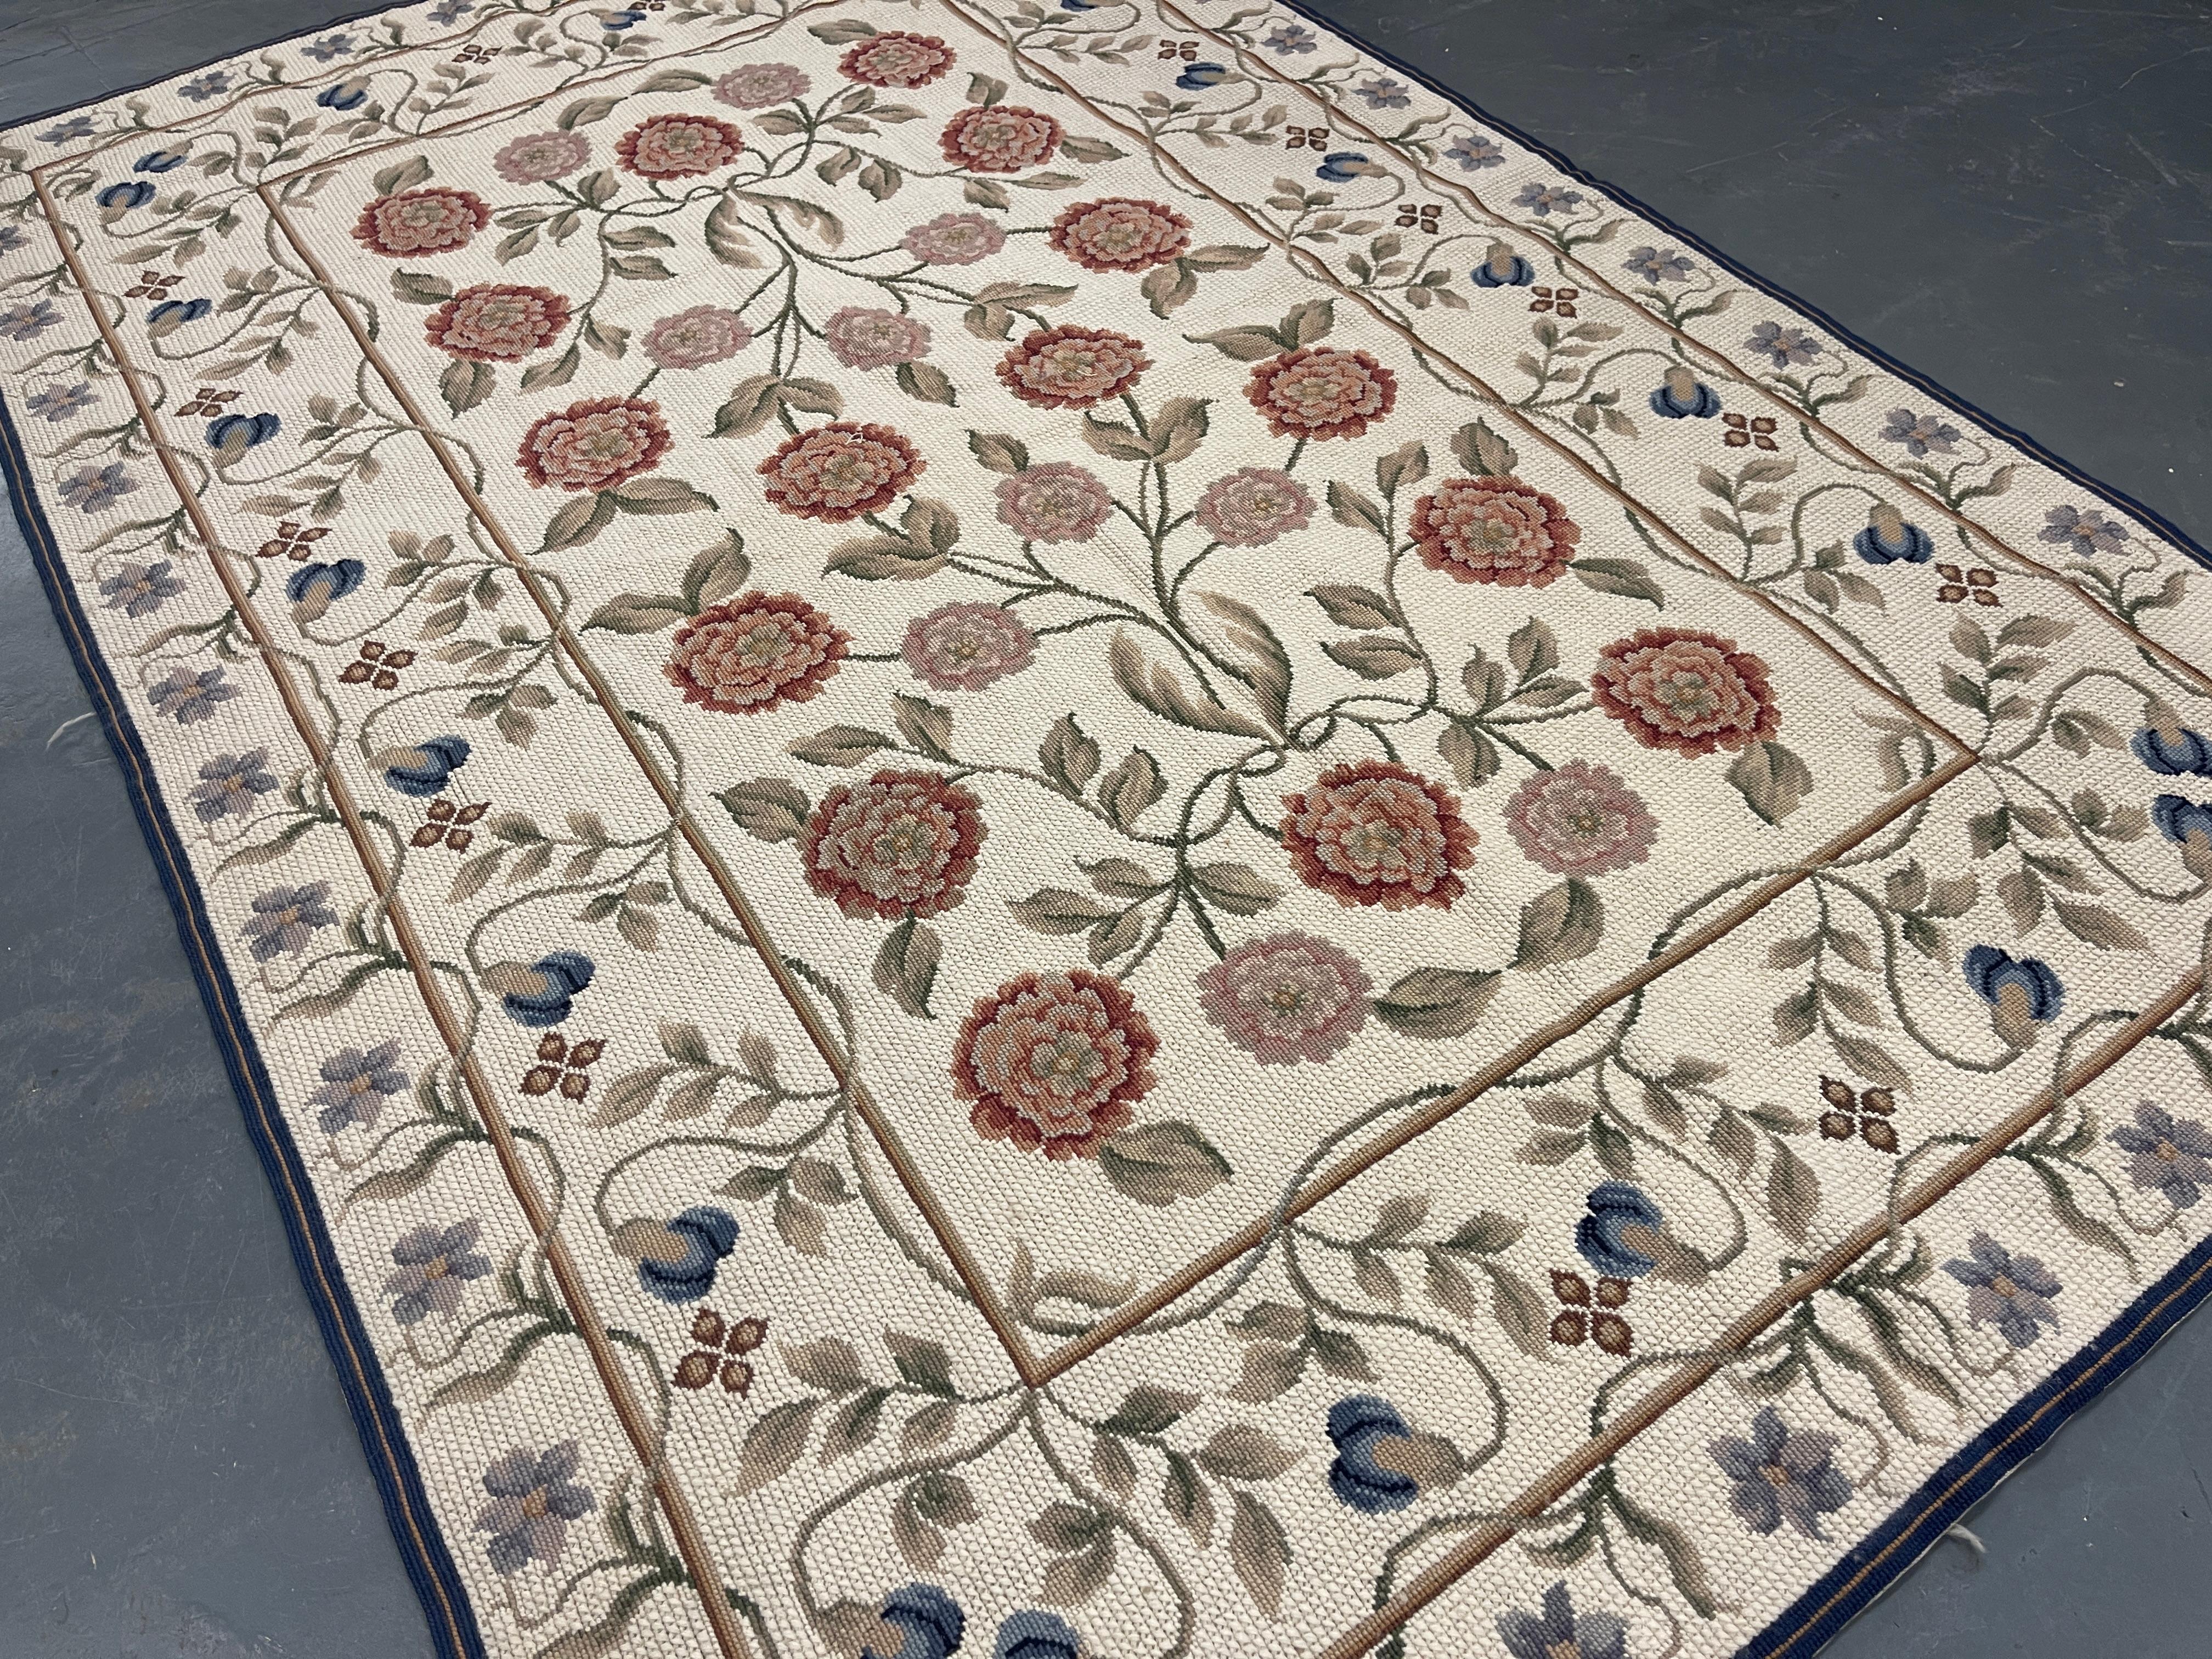 This fantastic area foral rug has been handwoven with a beautiful all-over floral design on an ivory-blue background with accents of cream, green, pink and ivory. This elegant piece's colour and design make it the perfect accent rug.
This rug style